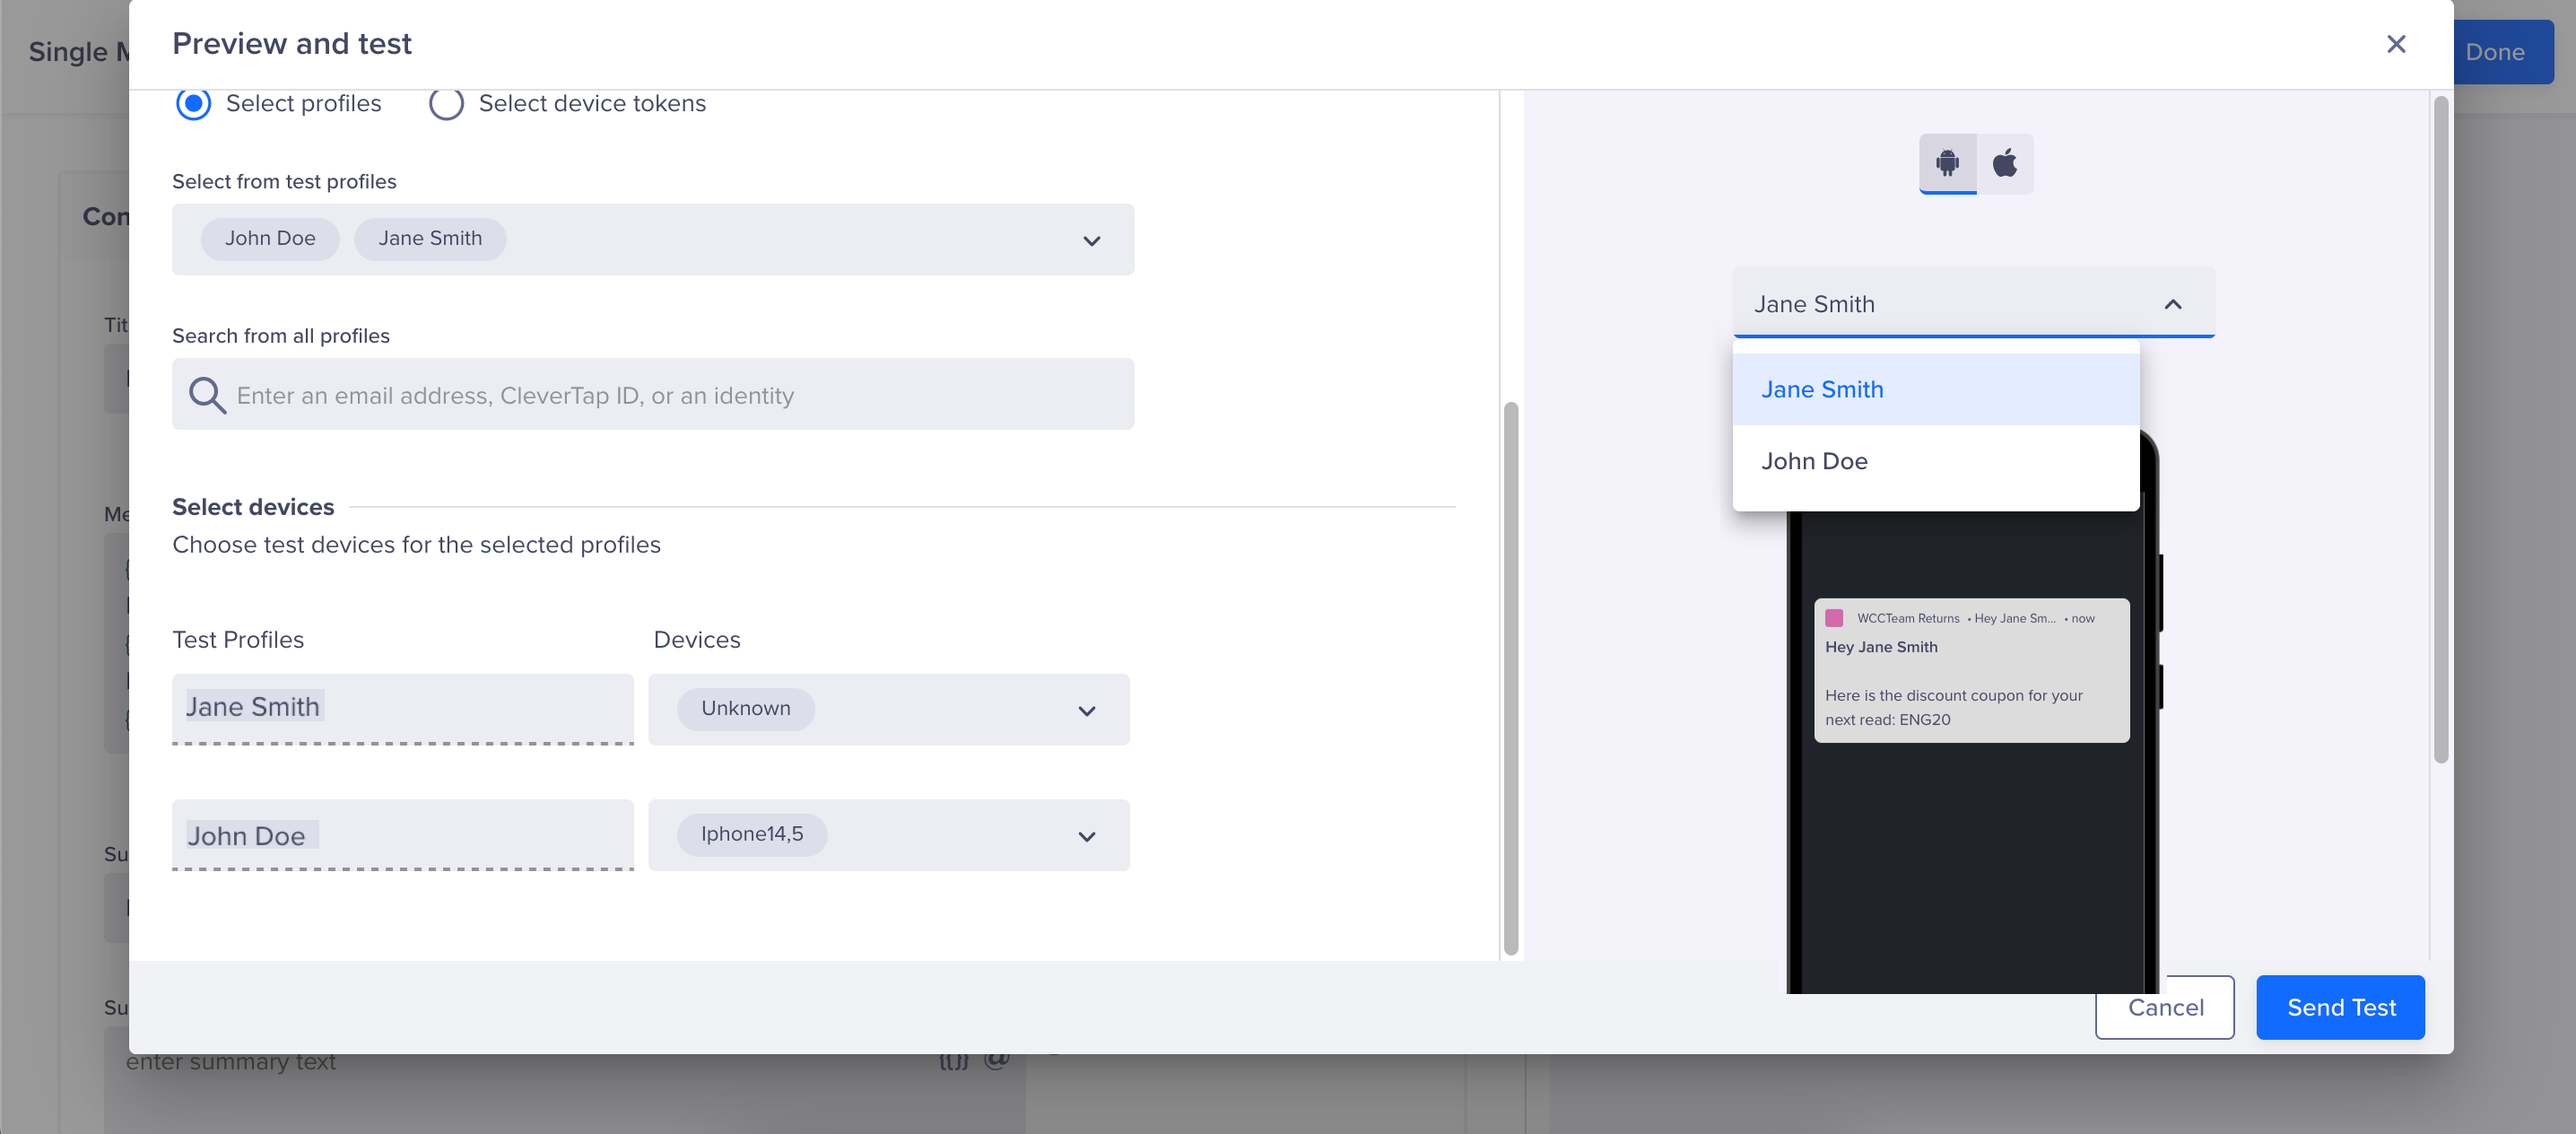 Select User Profile to Preview Campaign with Personalized Values